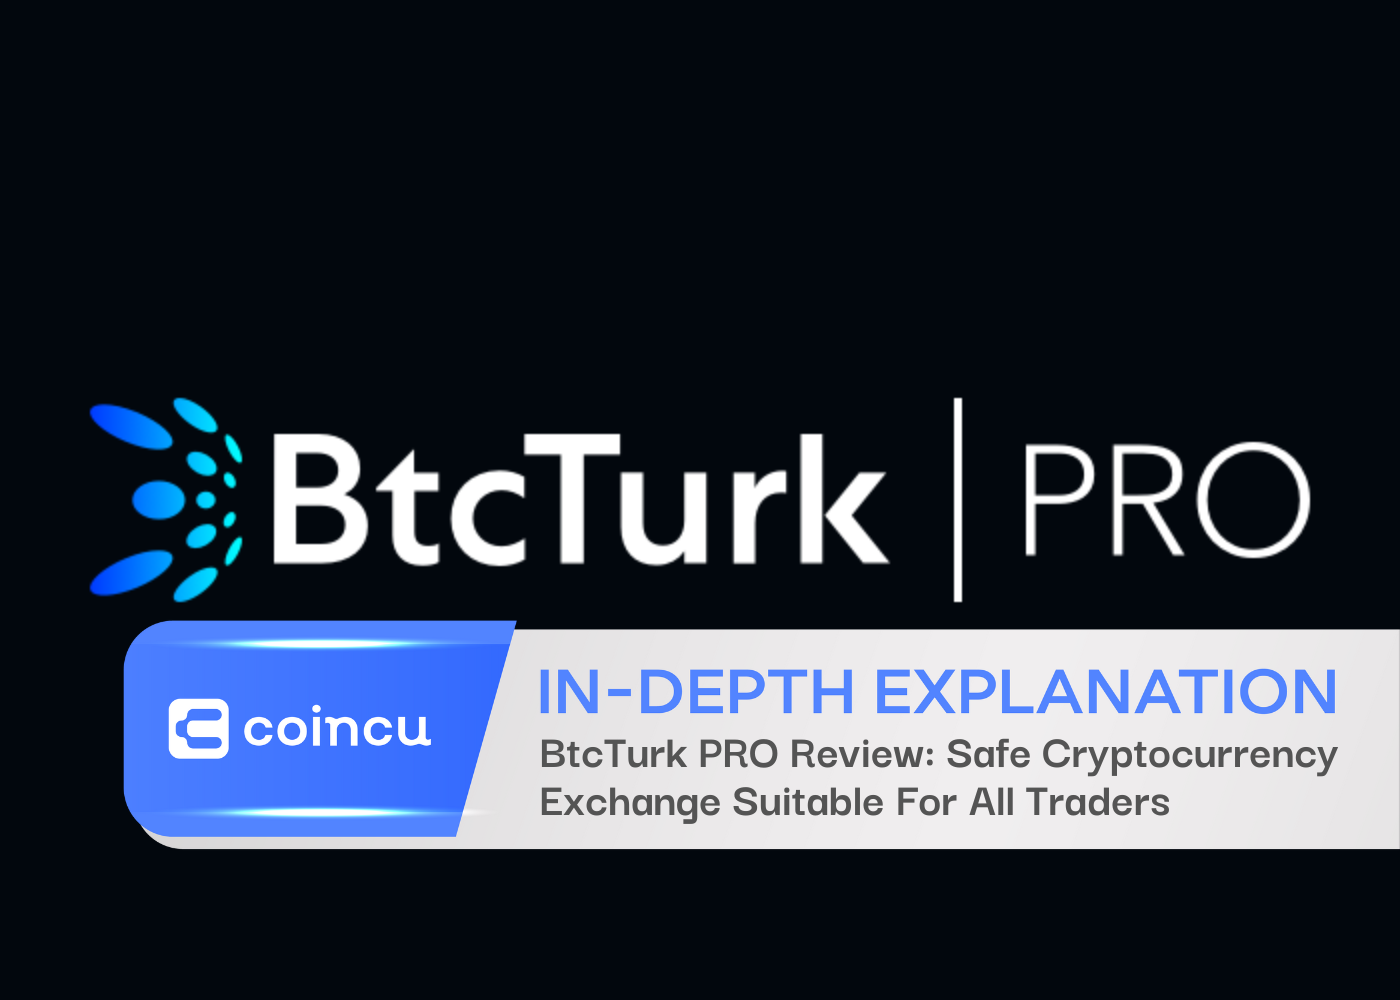 BtcTurk PRO Review: Safe Cryptocurrency Exchange Suitable For All Traders